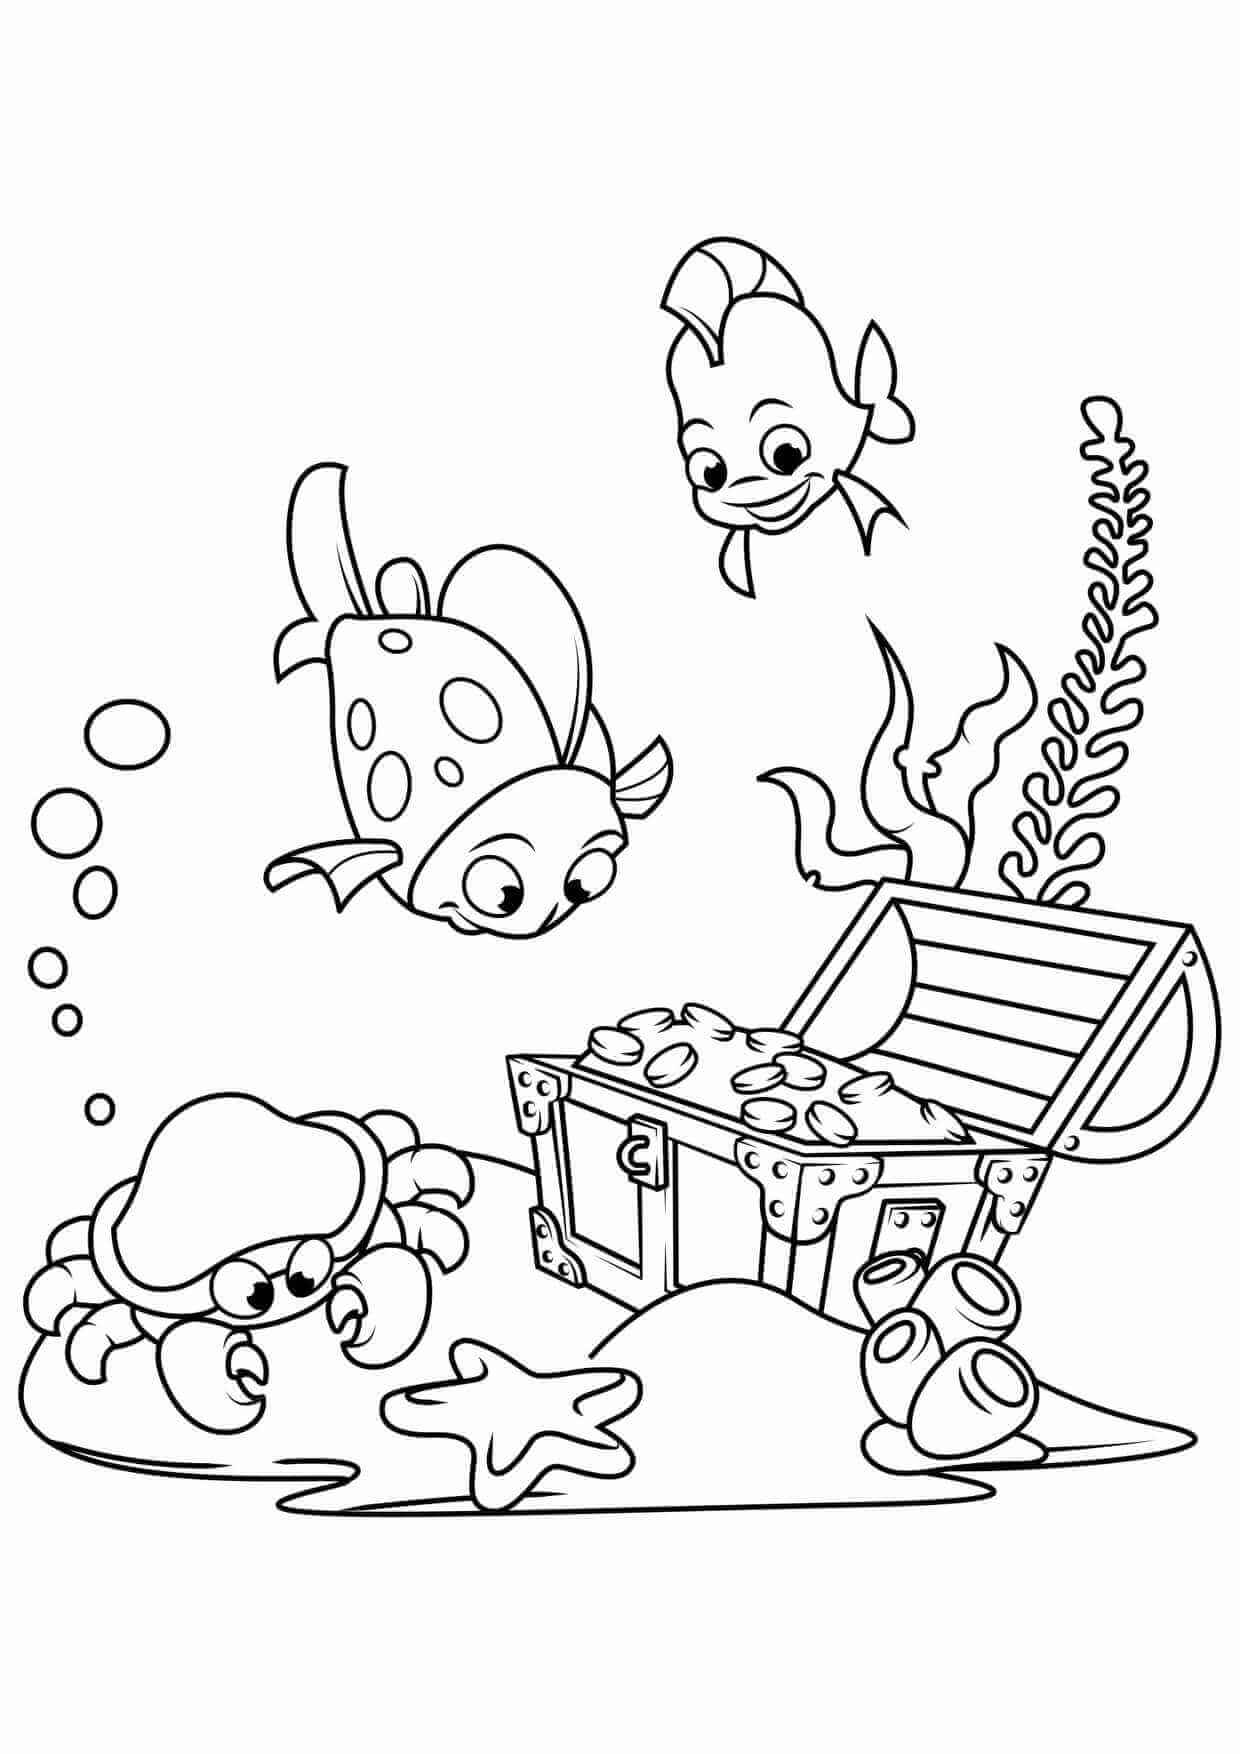 Coloring Page For Girls